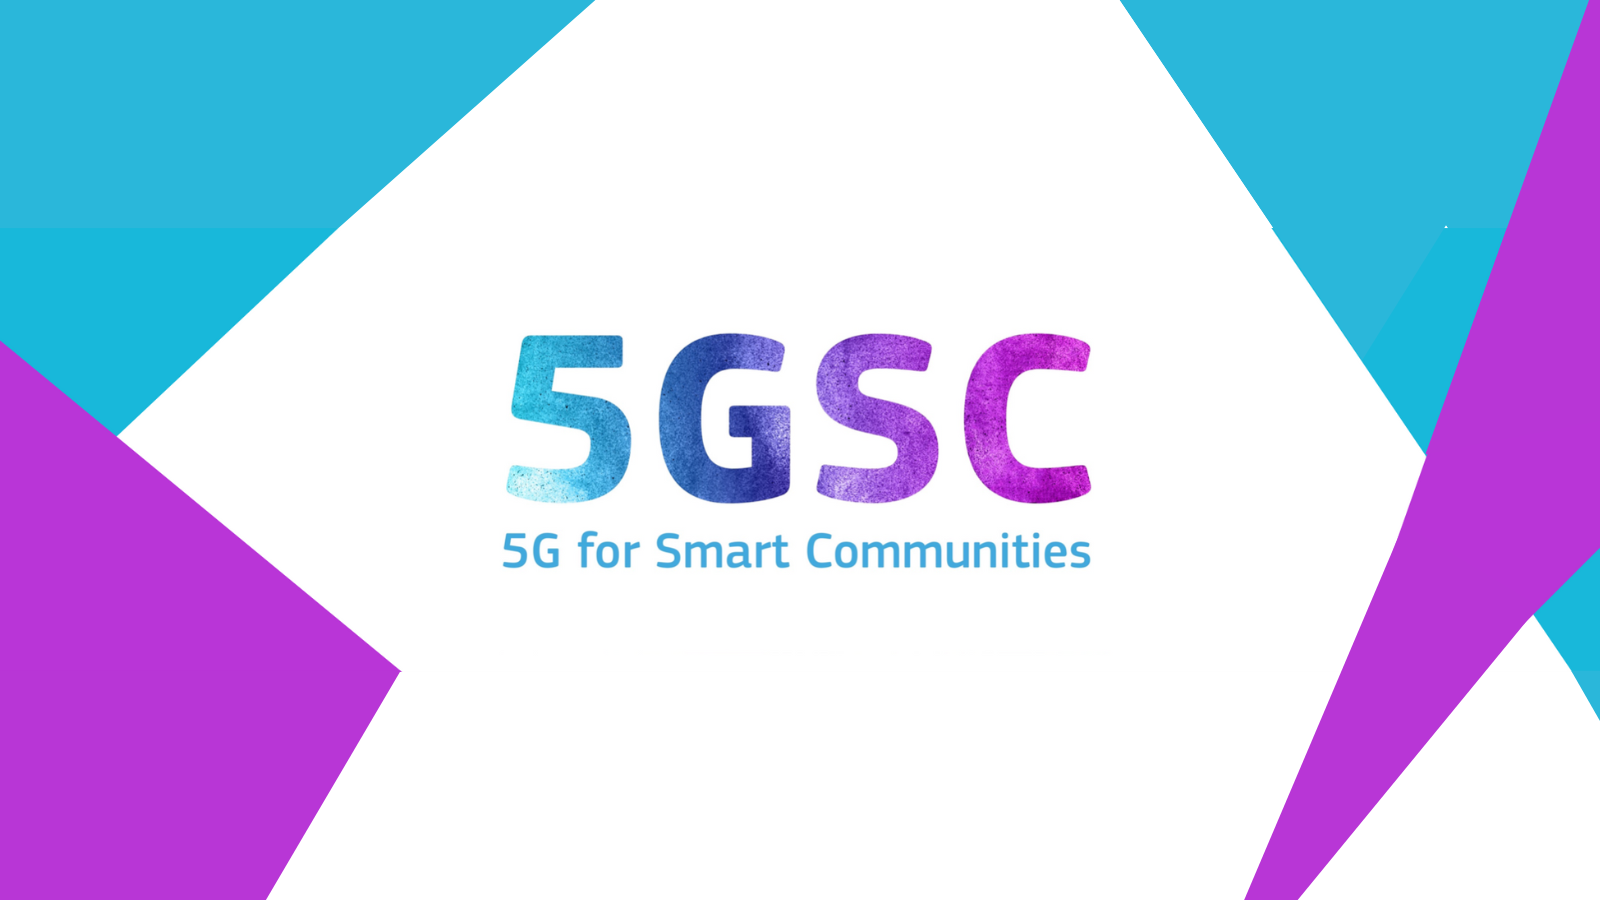 5G for Smart Communities Support Platform Launches Insight Consultation for Third Call